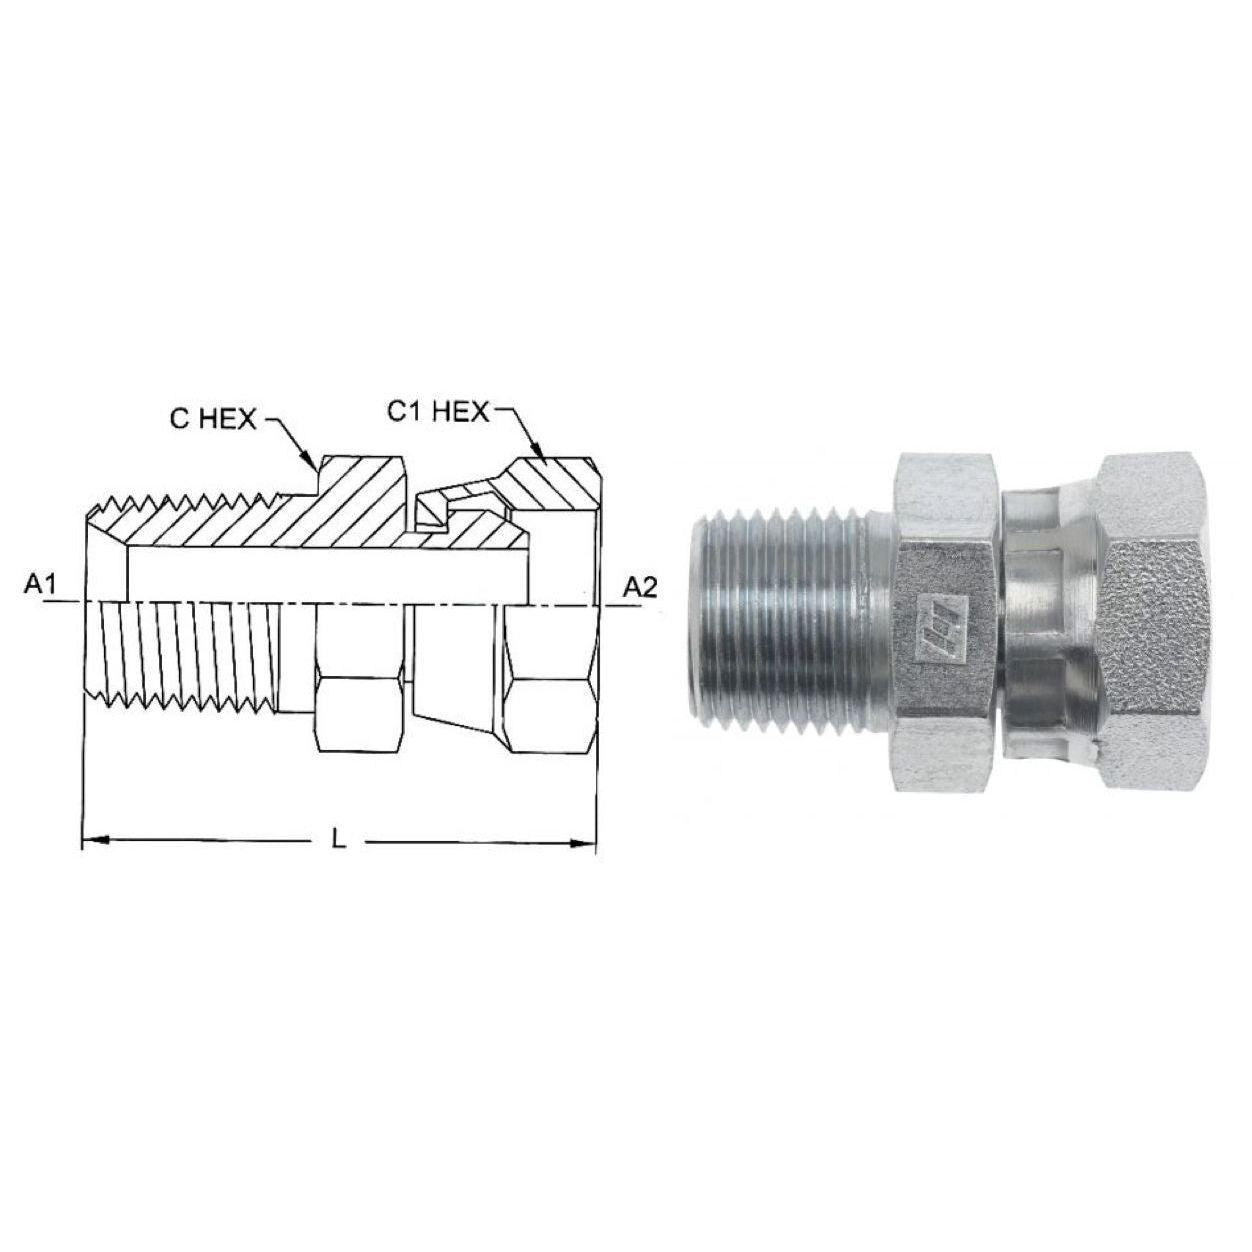 1404-16-16-SS : OneHydraulics Straight Adapter, 1 Male NPT x 1 Female NPT Swivel, Stainless Steel, 2400psi